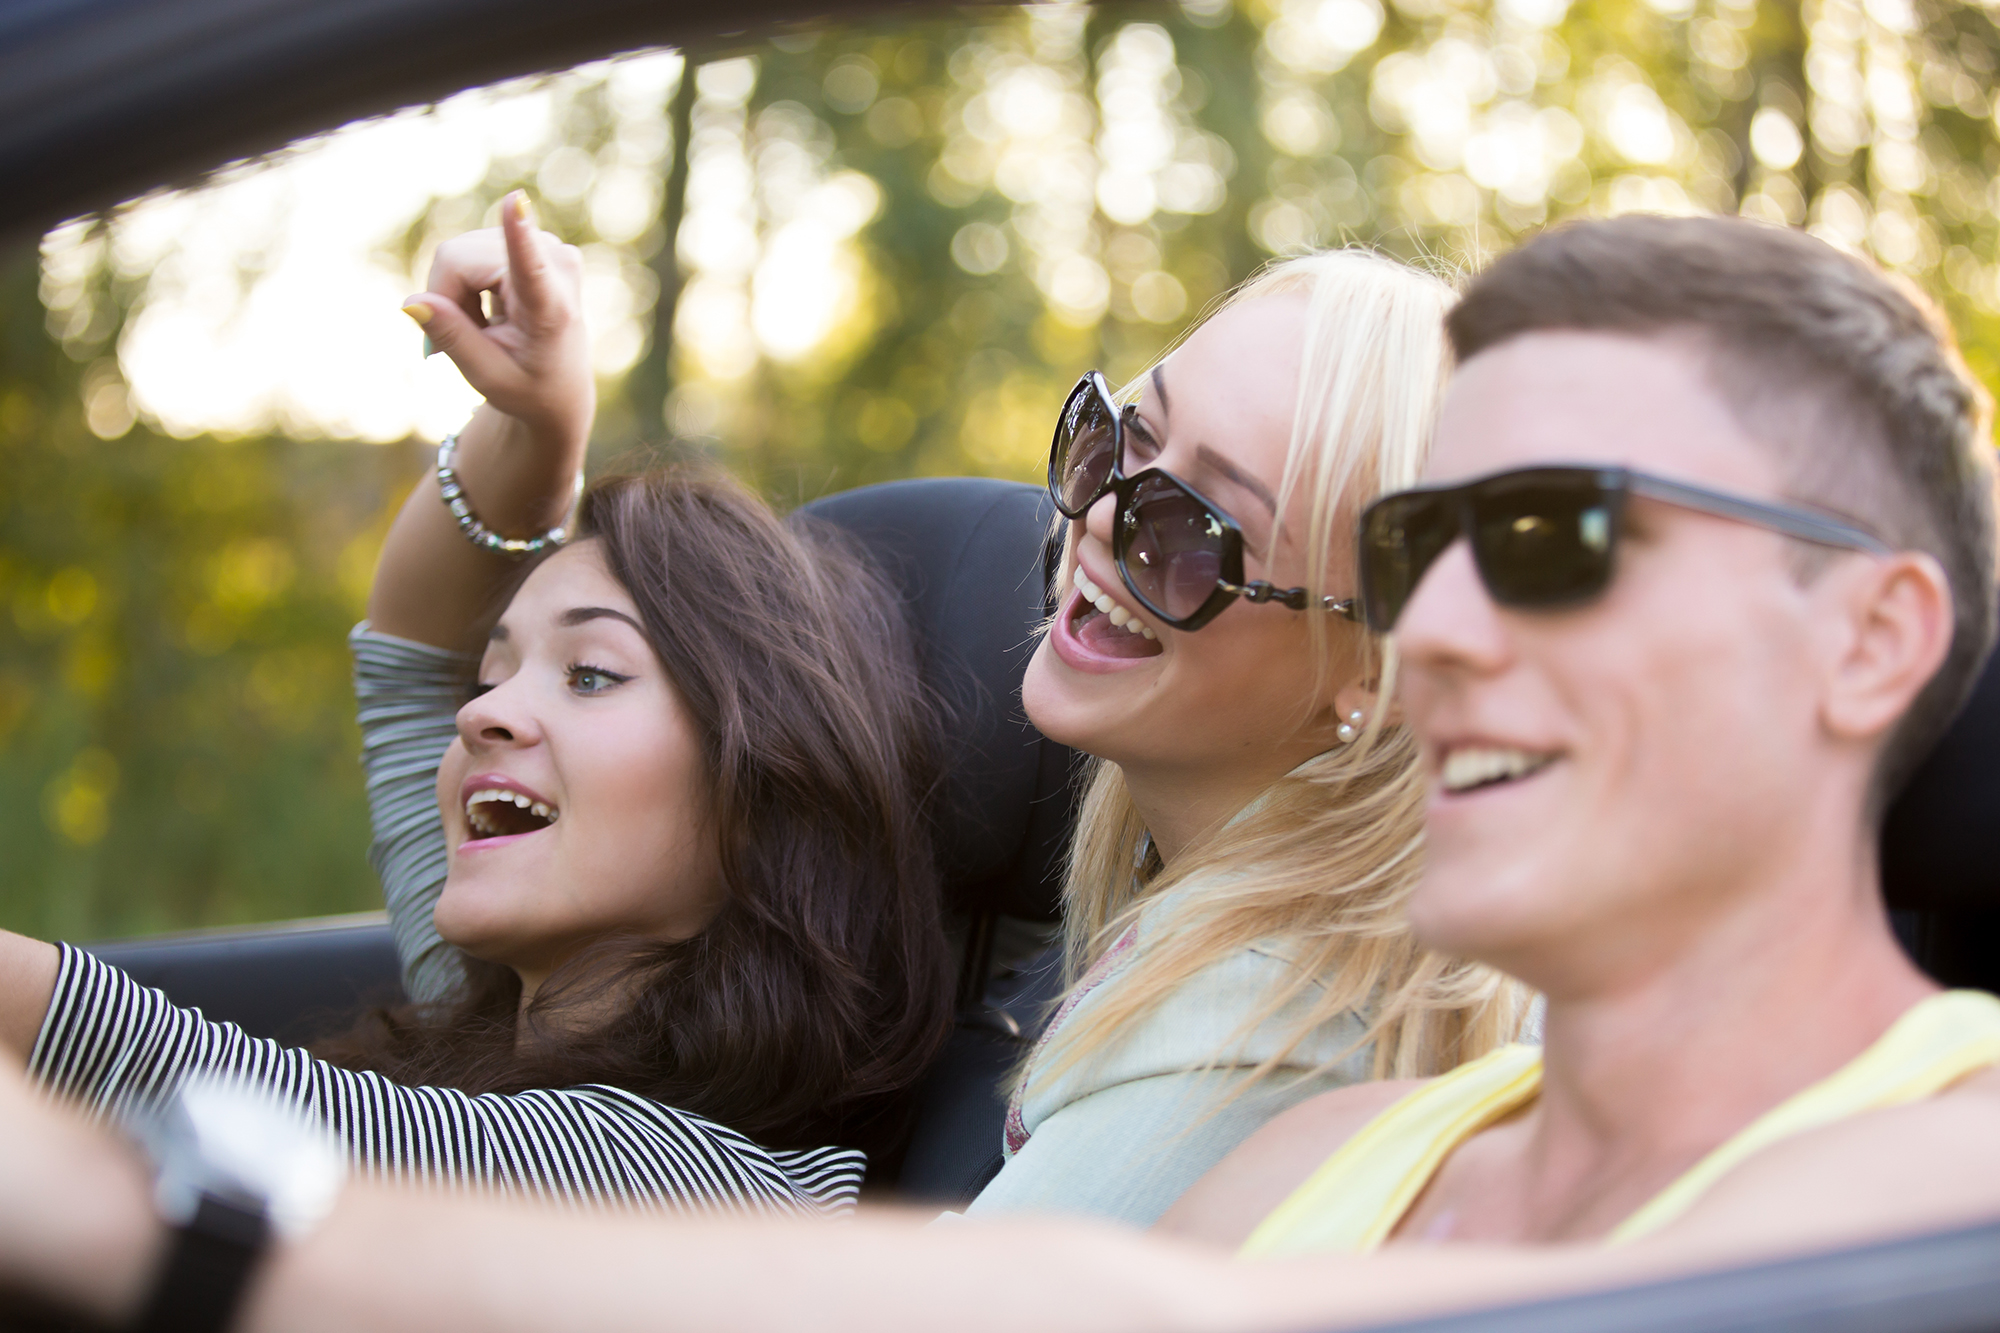 Group of three carefree cheerful friends on vacations, traveling in convertible on summer day, having fun together